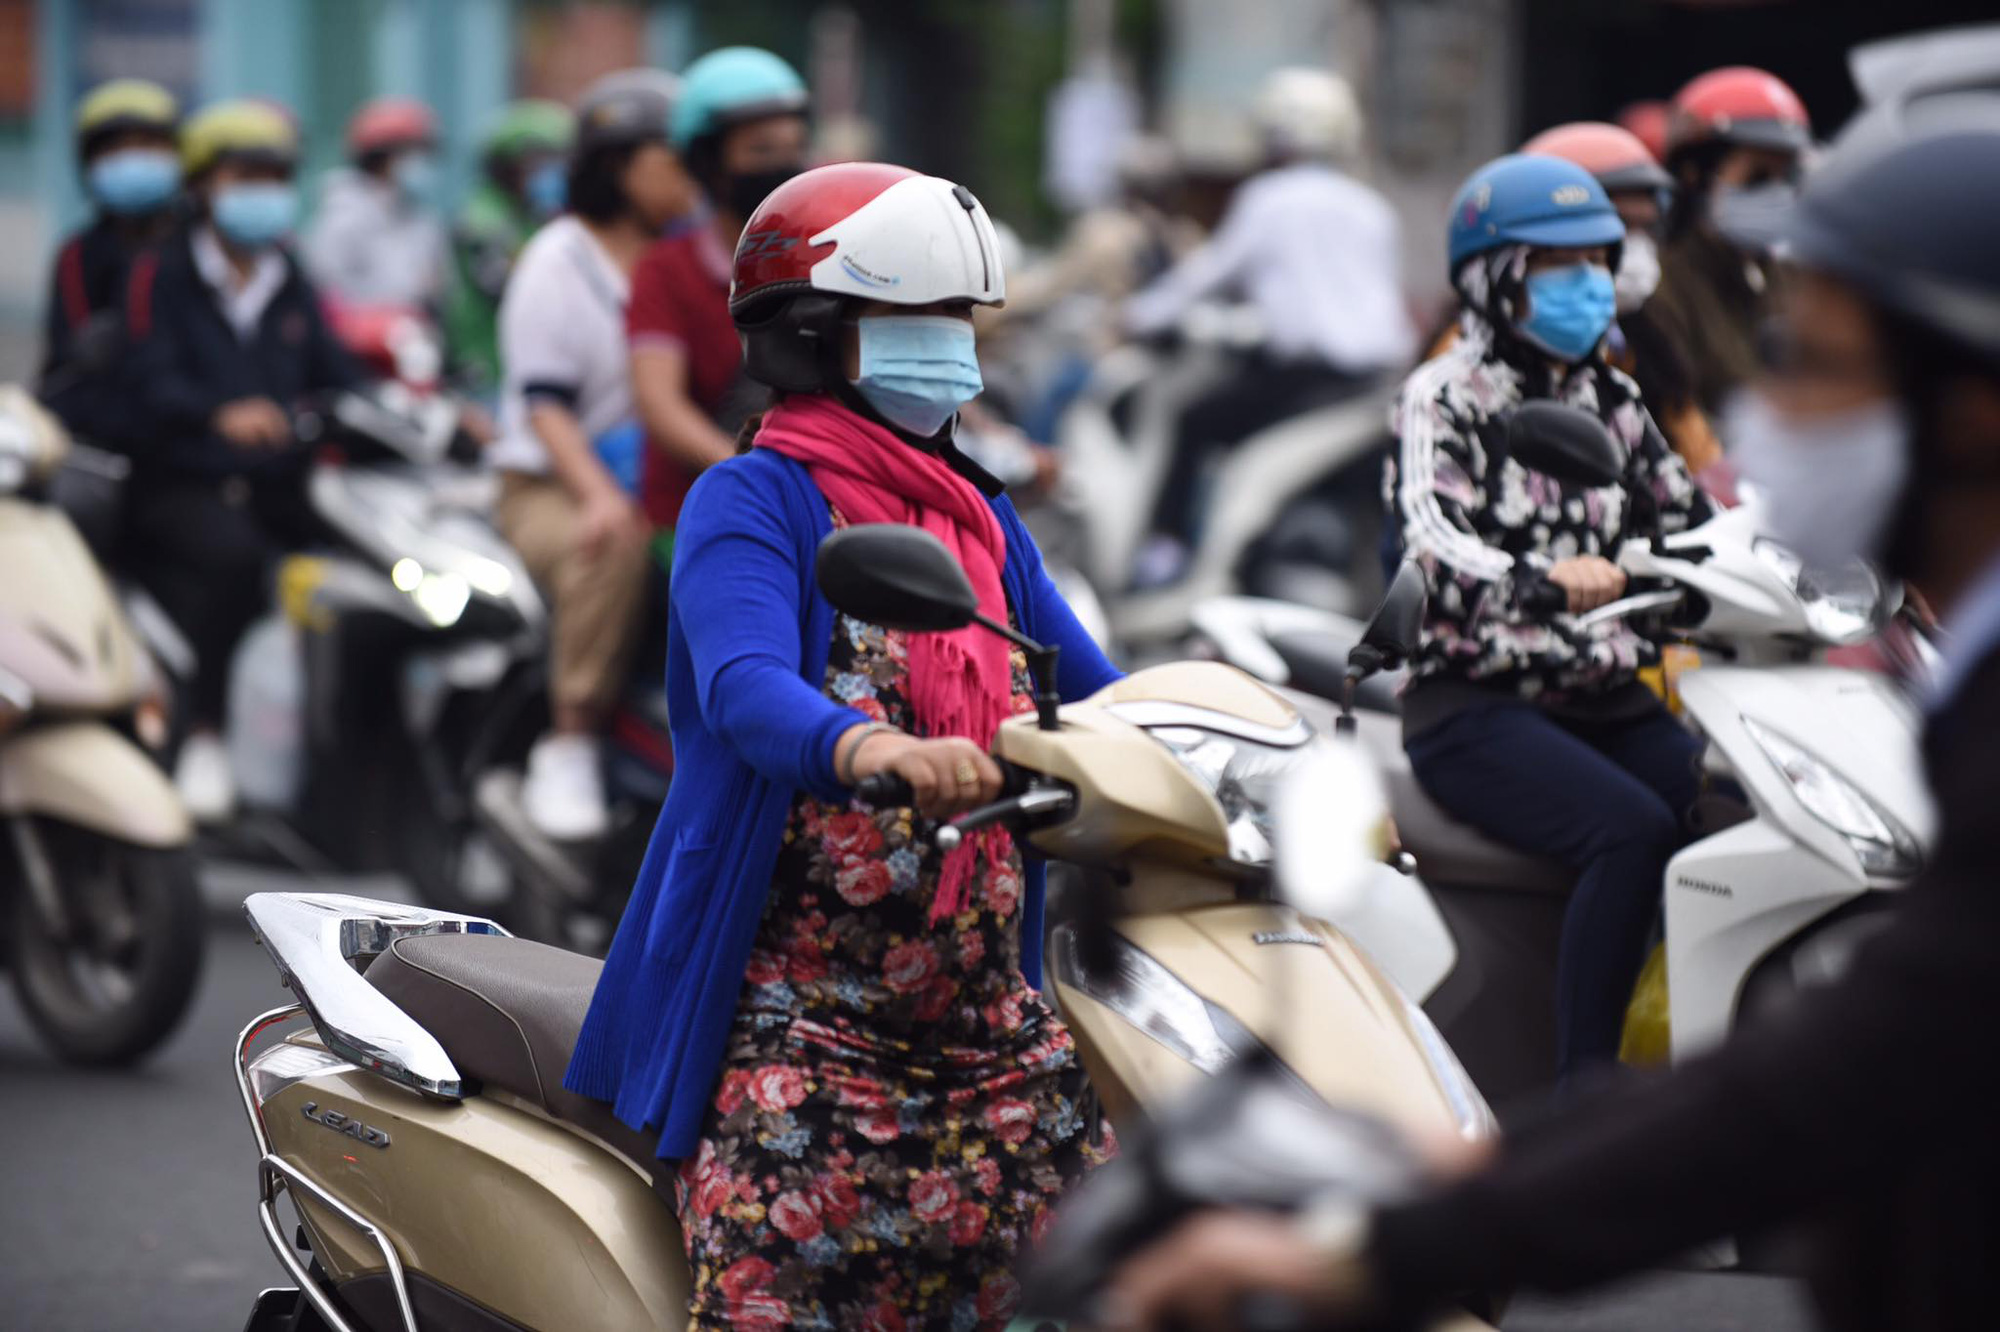 Commuters travel on a street in Ho Chi Minh City, November 11, 2020. Photo: Quang Dinh / Tuoi Tre